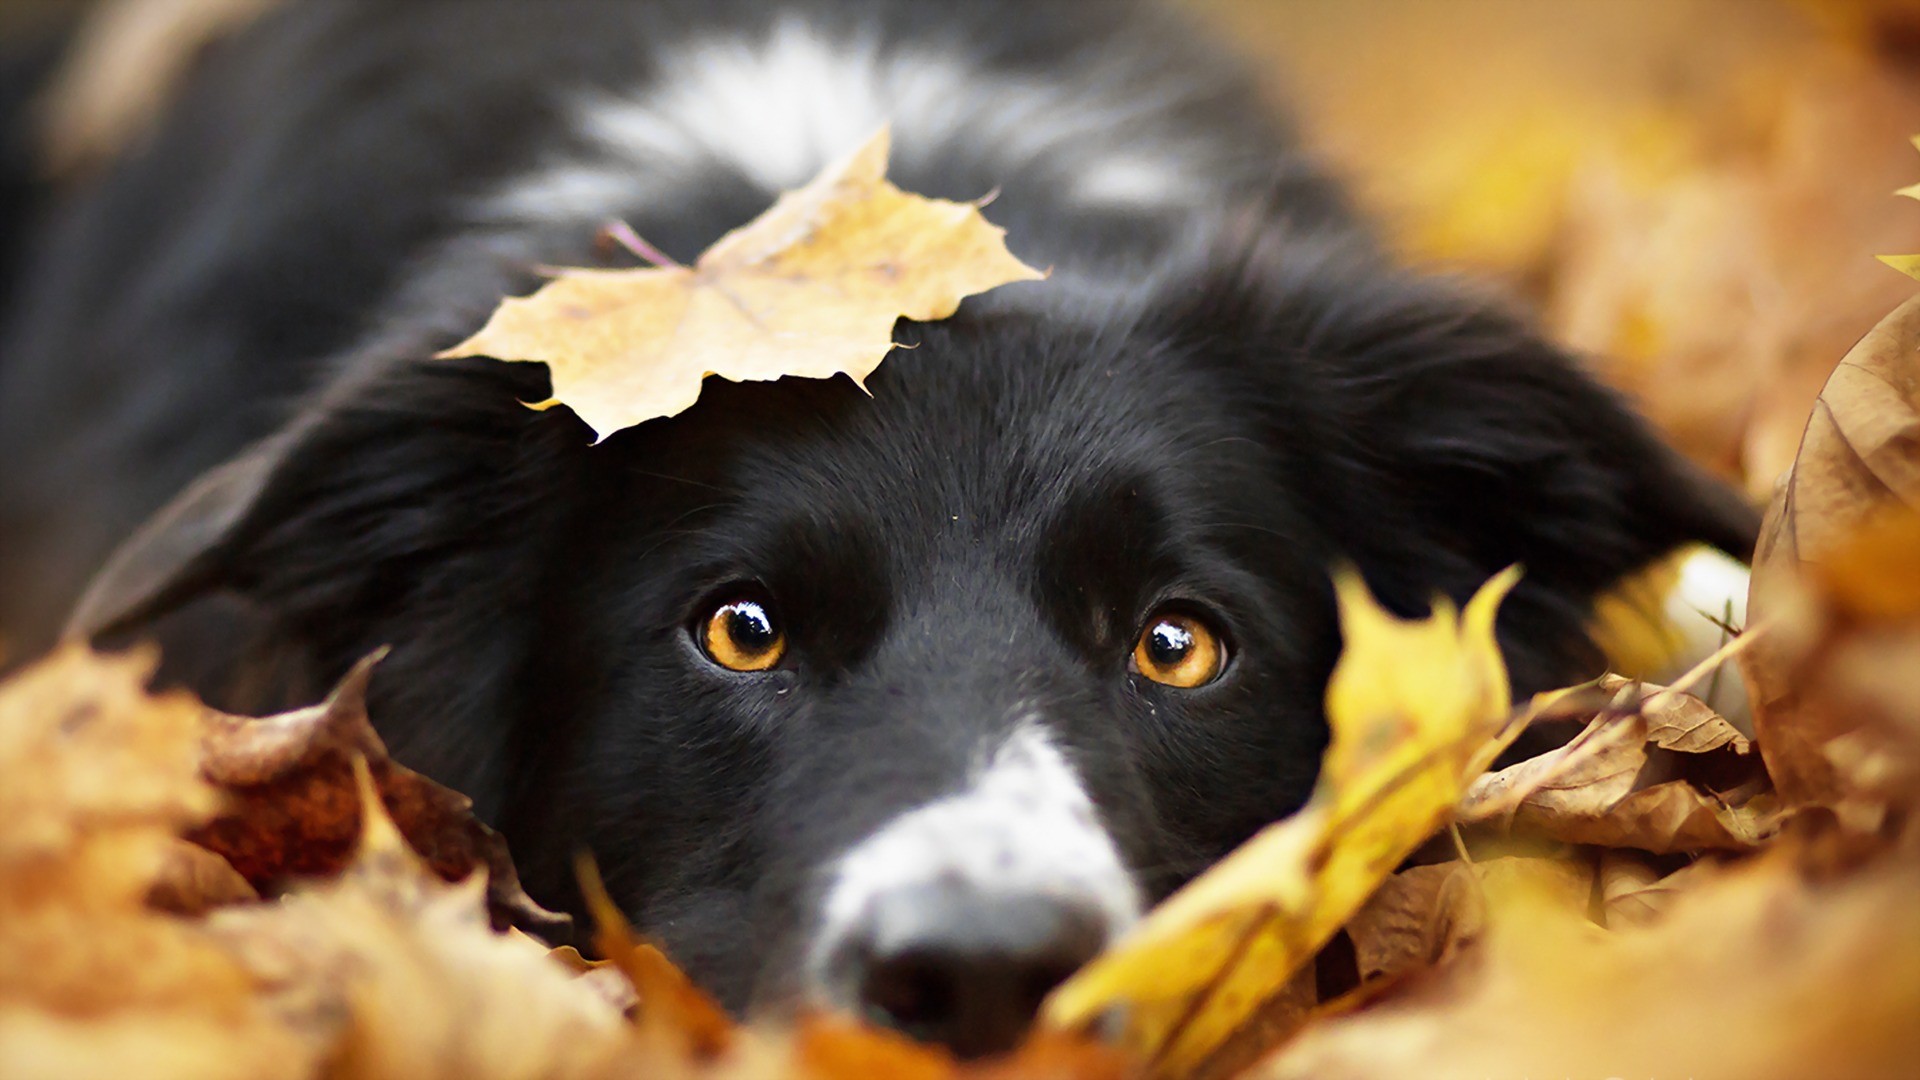 1920x1080 Border Collie Wallpaper Android Apps on Google Play